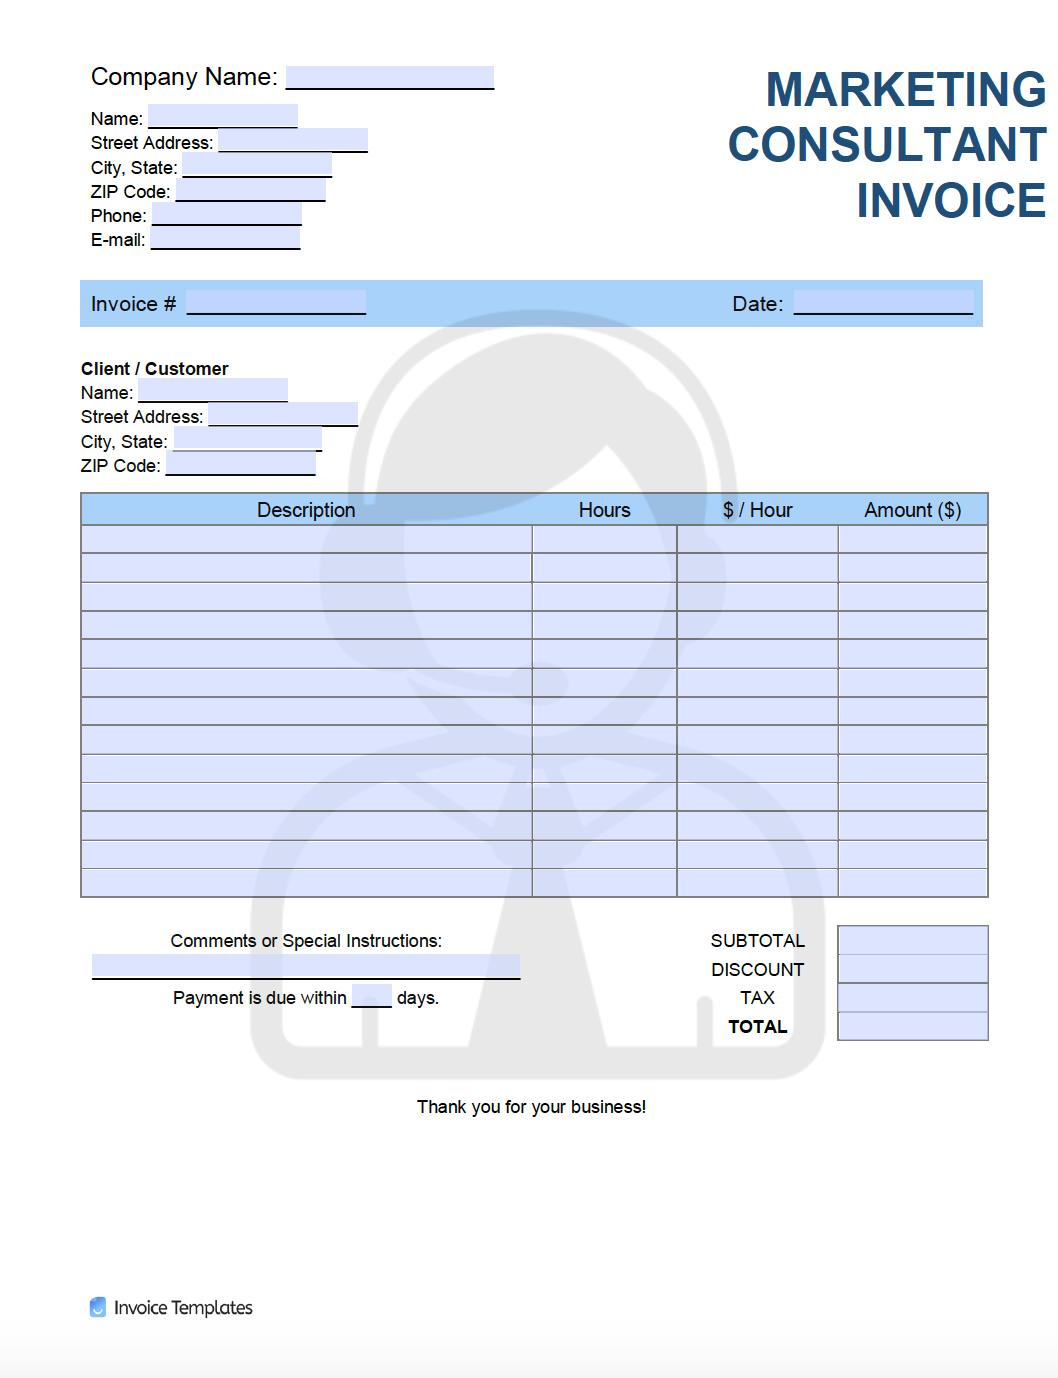 consulting invoice template microsoft word